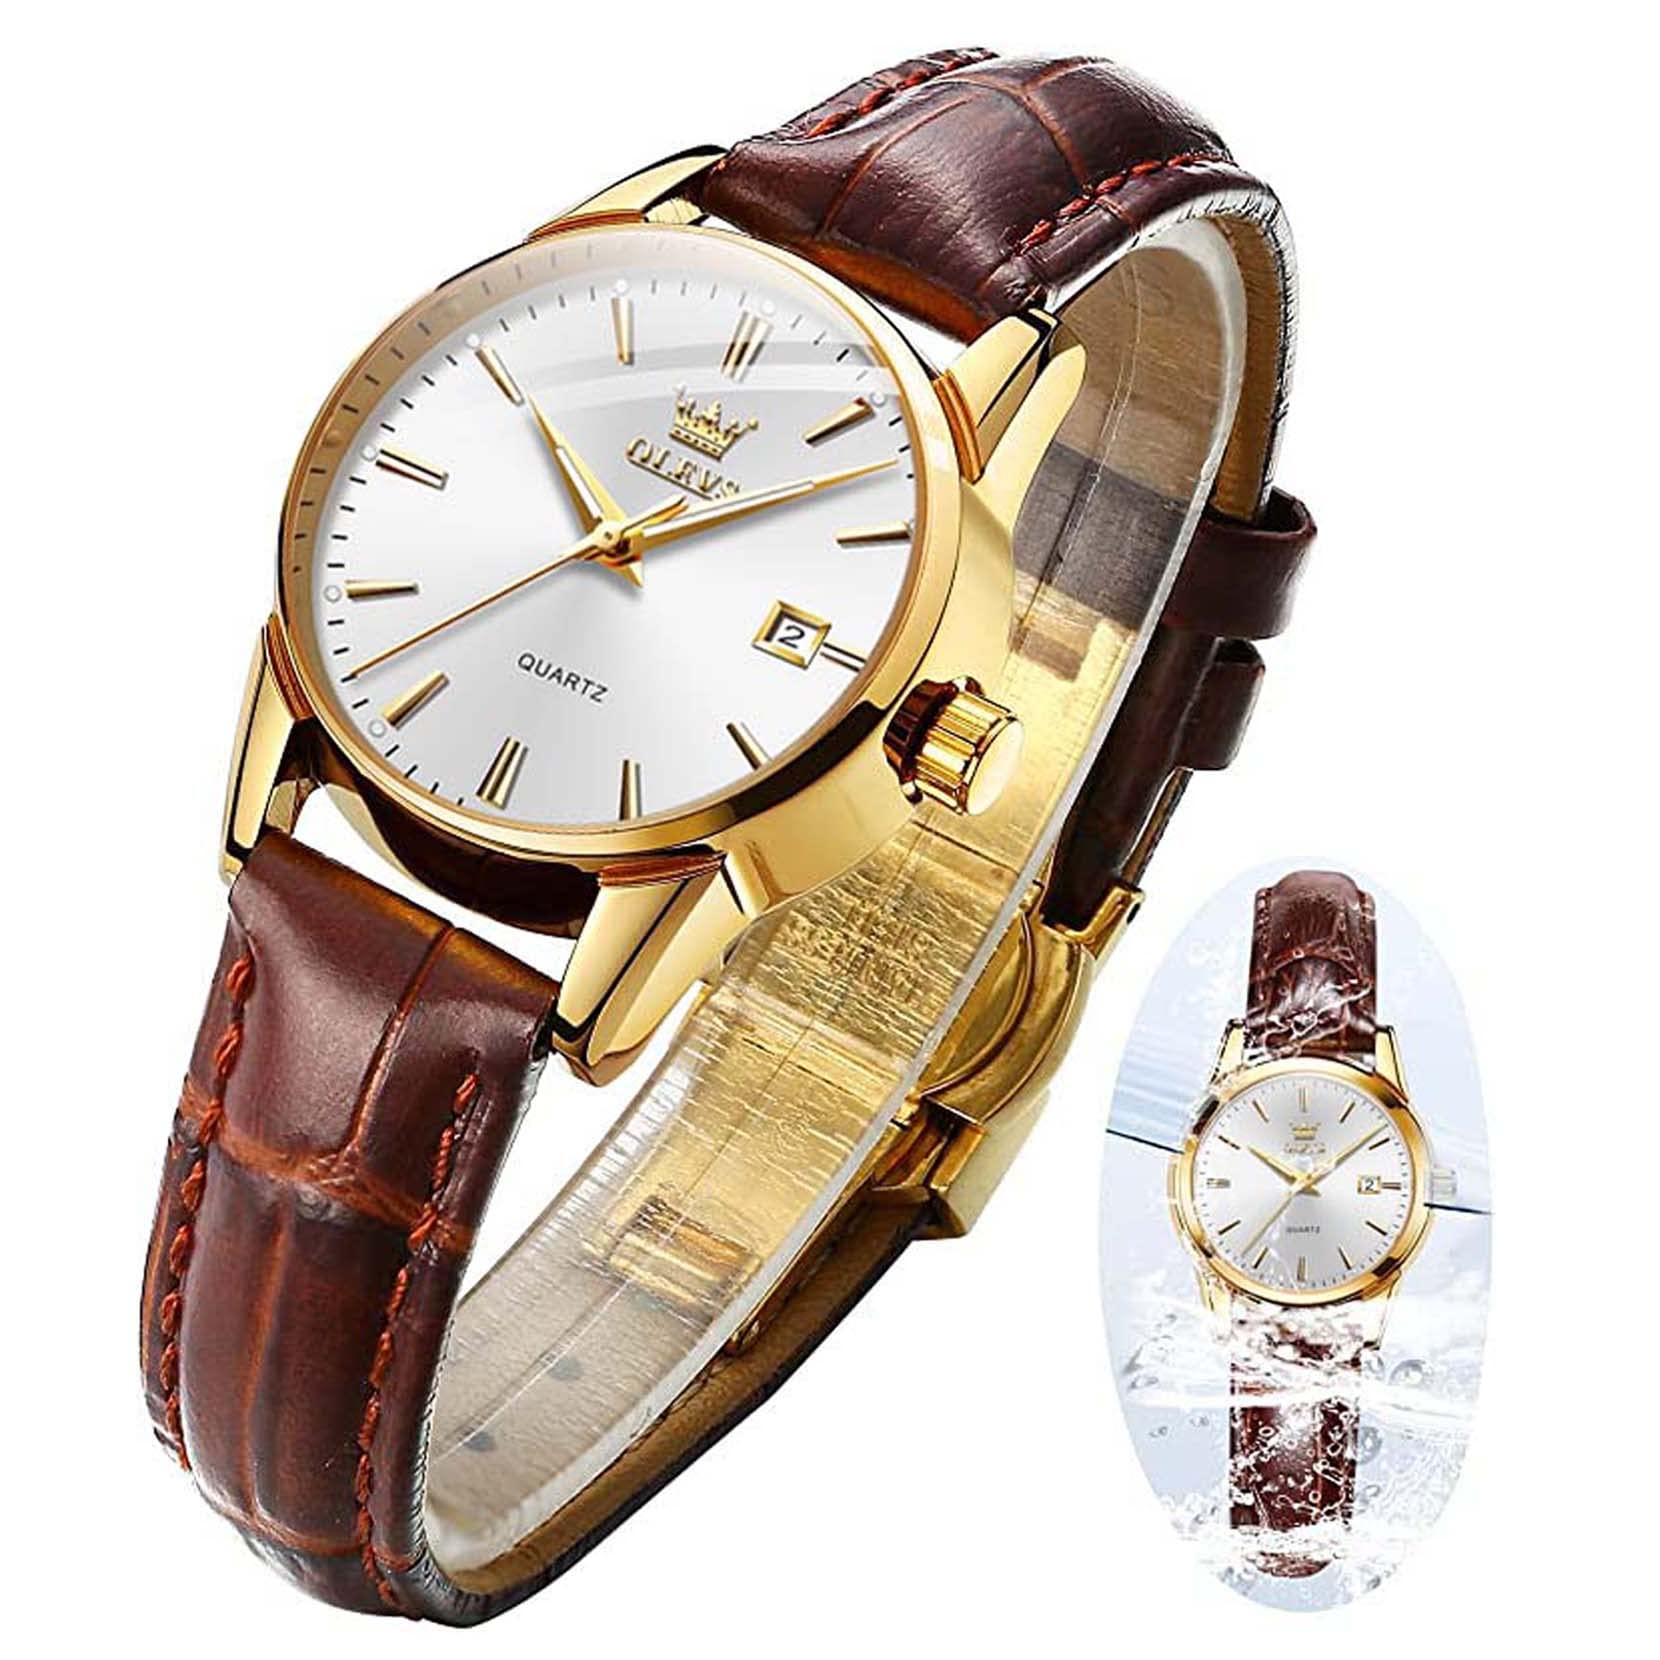 OLEVS Easy Reader Quartz Analog Leather Strap Watch with Date Feature Diamonds Dial Rose Gold Fashion Dress Luminous Waterproof Ladies Watches